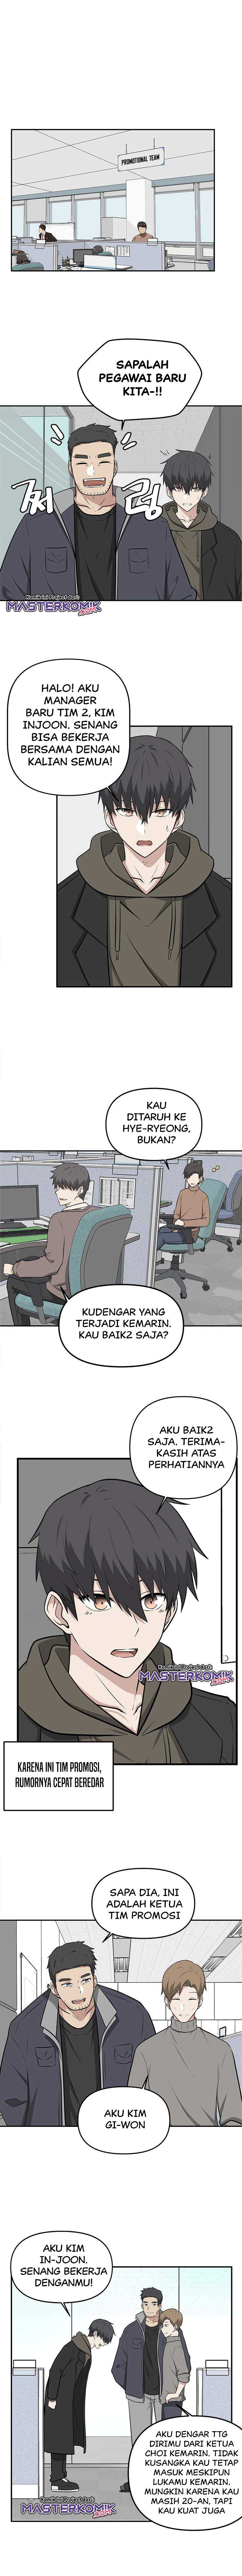 Where Are You Looking, Manager? Chapter 04